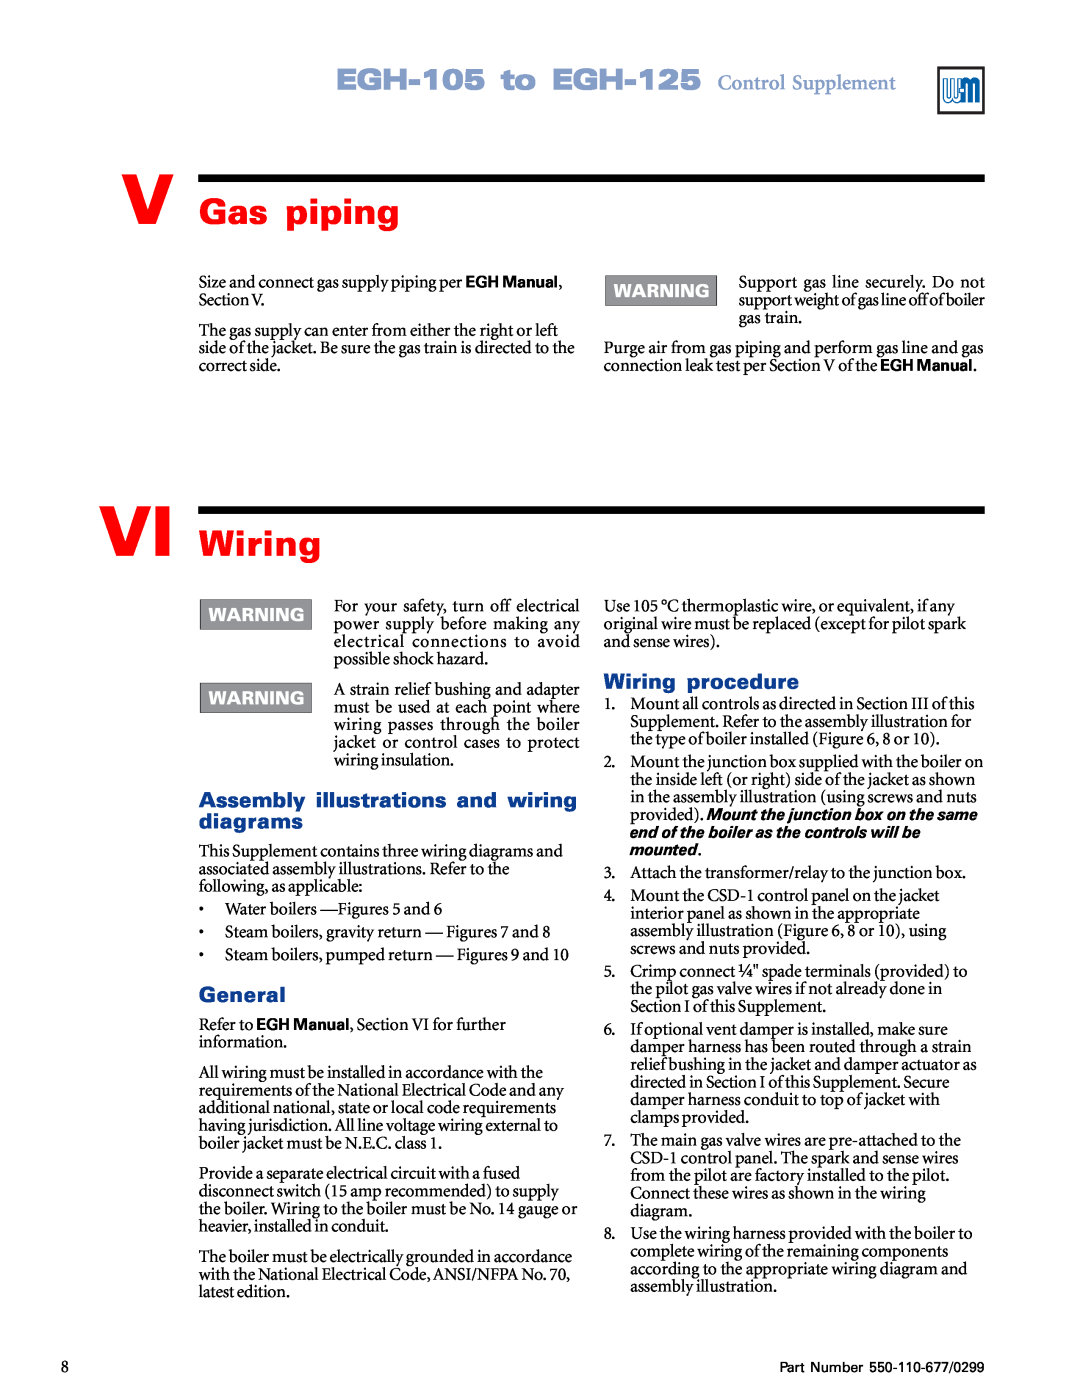 Weil-McLain EGH-105 manual V Gas piping, VI Wiring, Assembly illustrations and wiring diagrams, General, Wiring procedure 